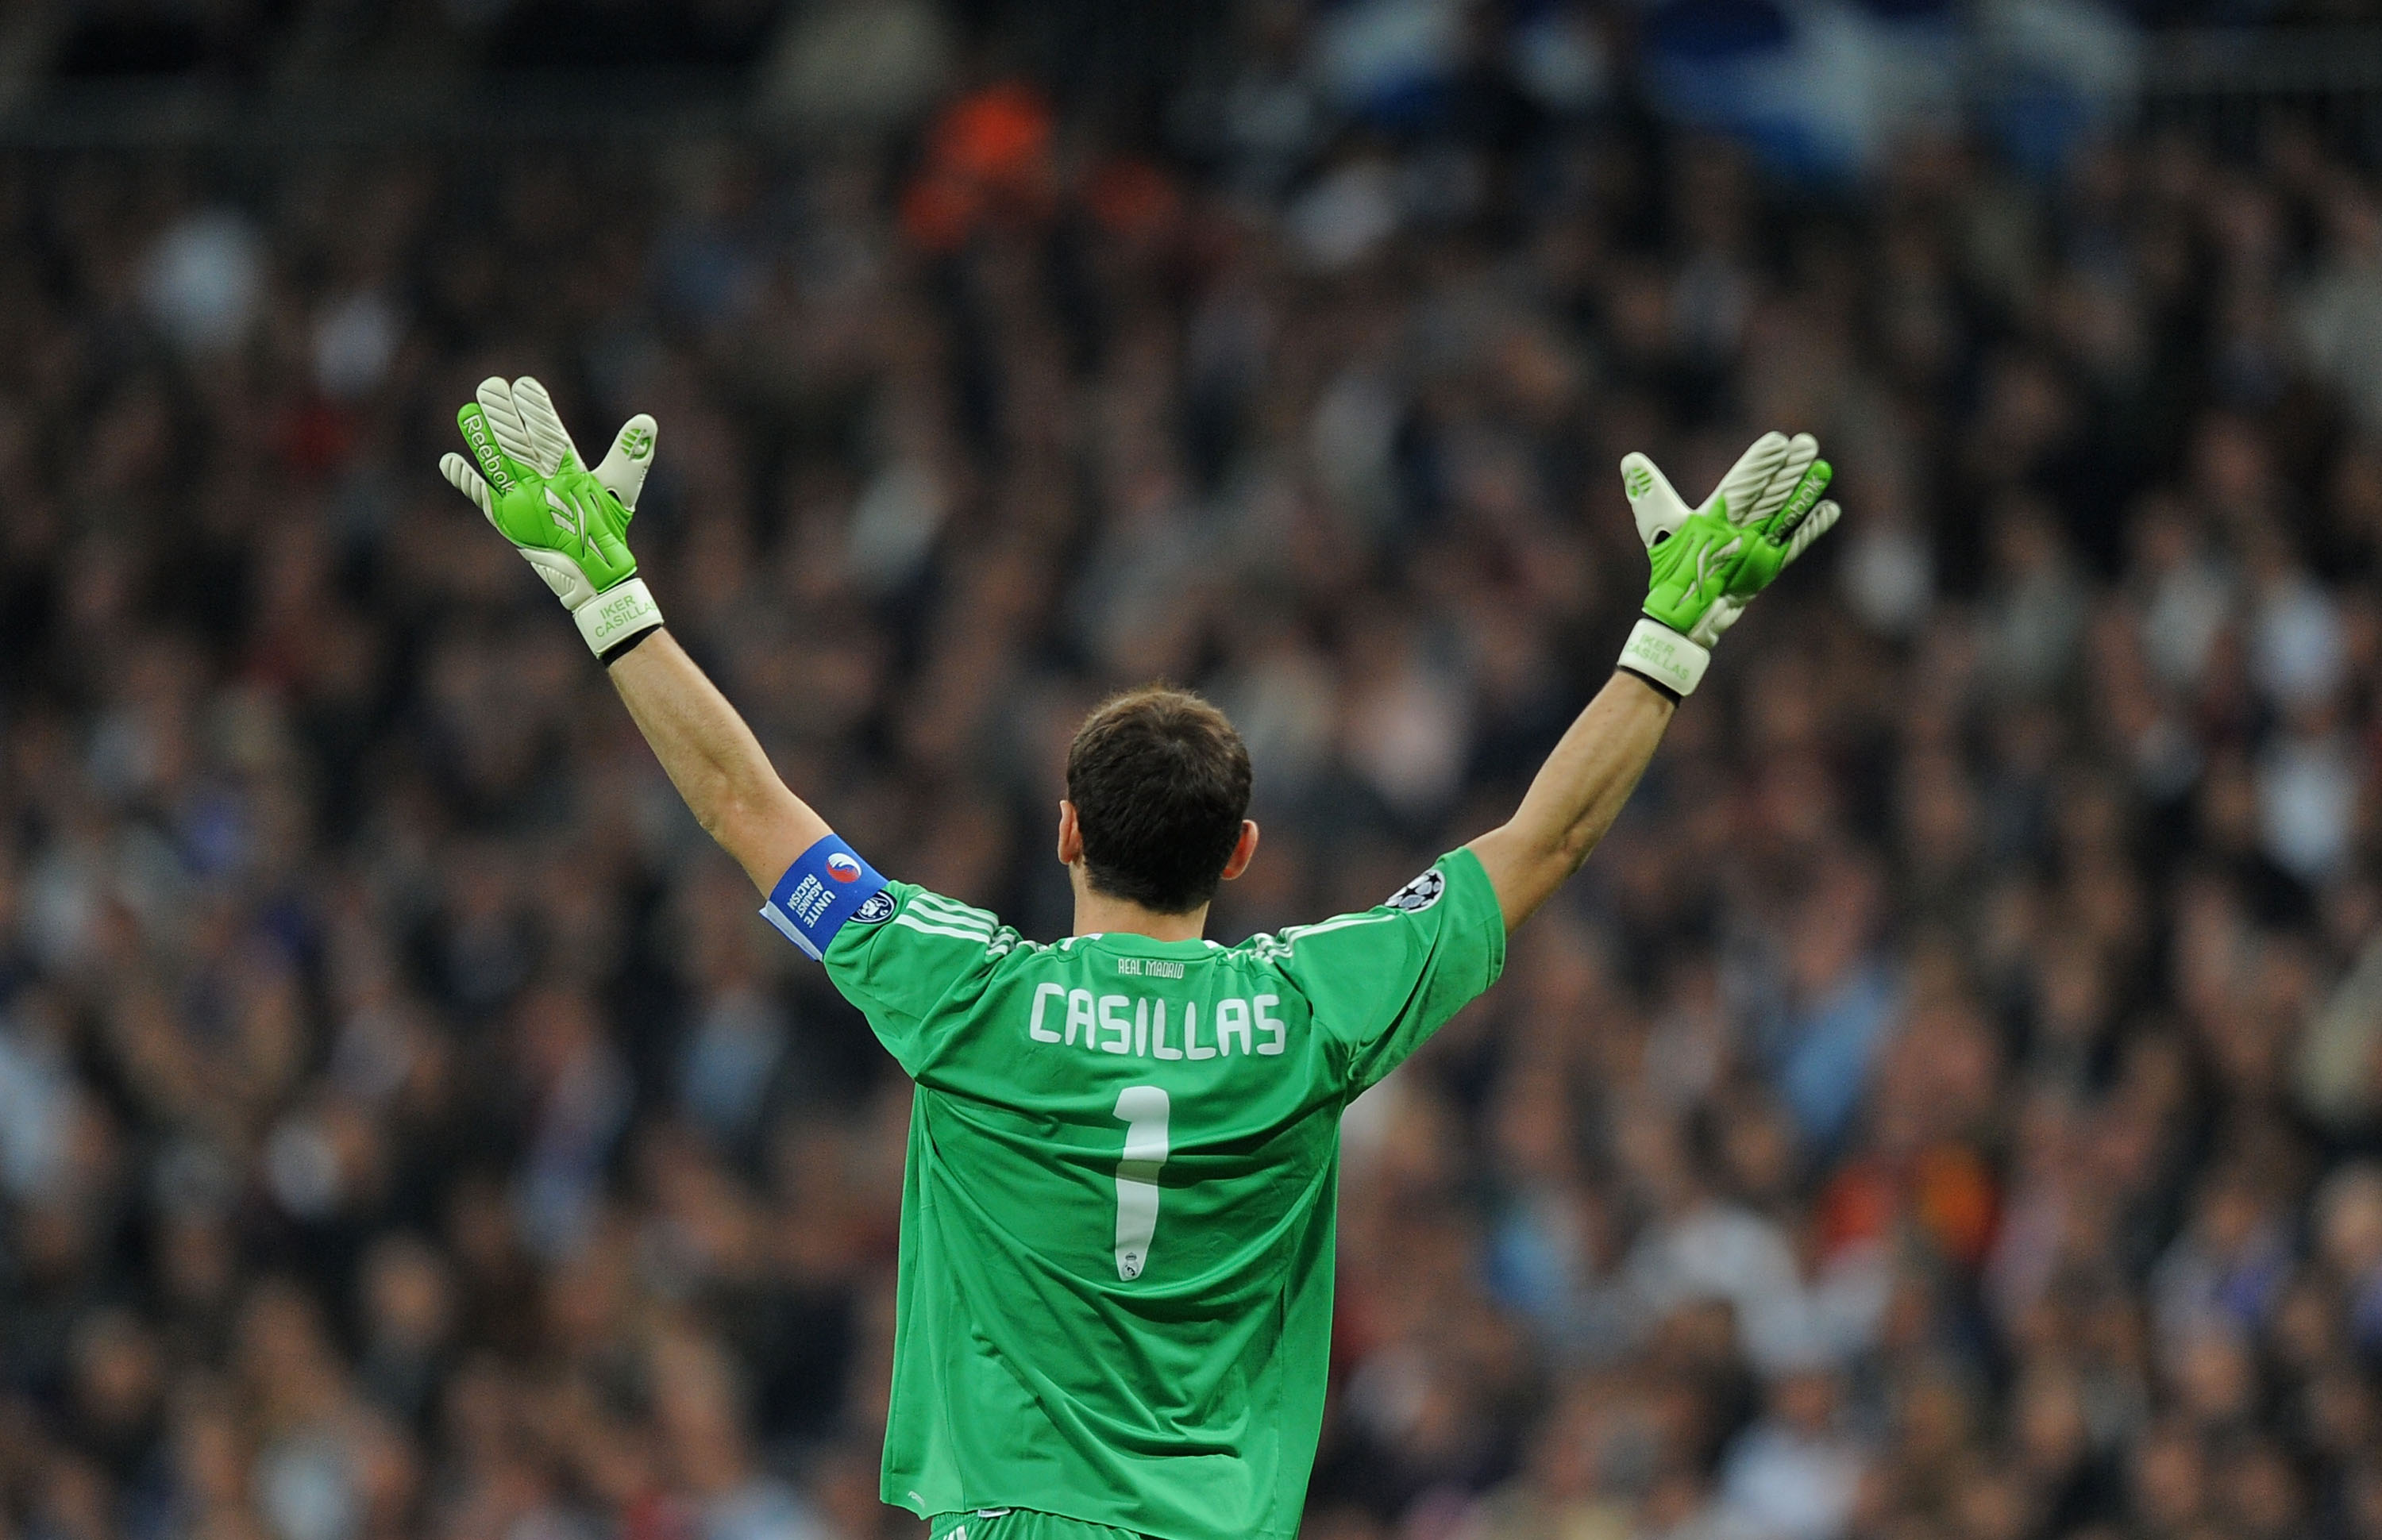 MADRID, SPAIN - OCTOBER 19:  Iker Casillas of Real Madrid urges on his side during the UEFA Champions League Group G match between Real Madrid and AC Milan at Estadio Santiago Bernabeu on October 19, 2010 in Madrid, Spain.  (Photo by Denis Doyle/Getty Ima